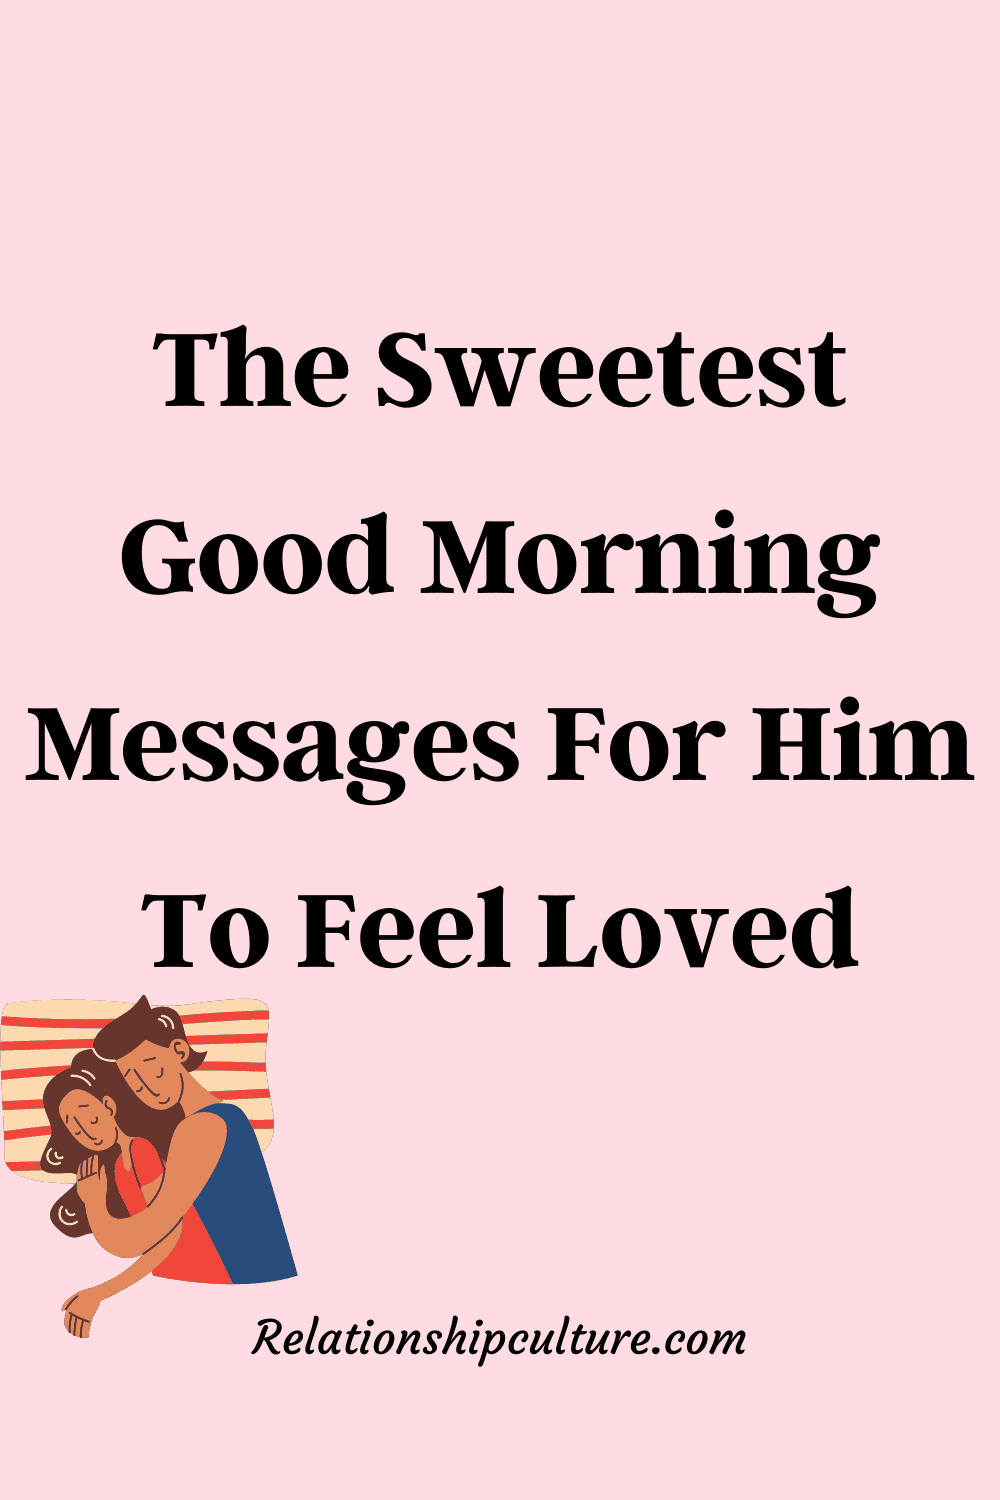 The Sweetest Good Morning Messages For Him To Feel Loved